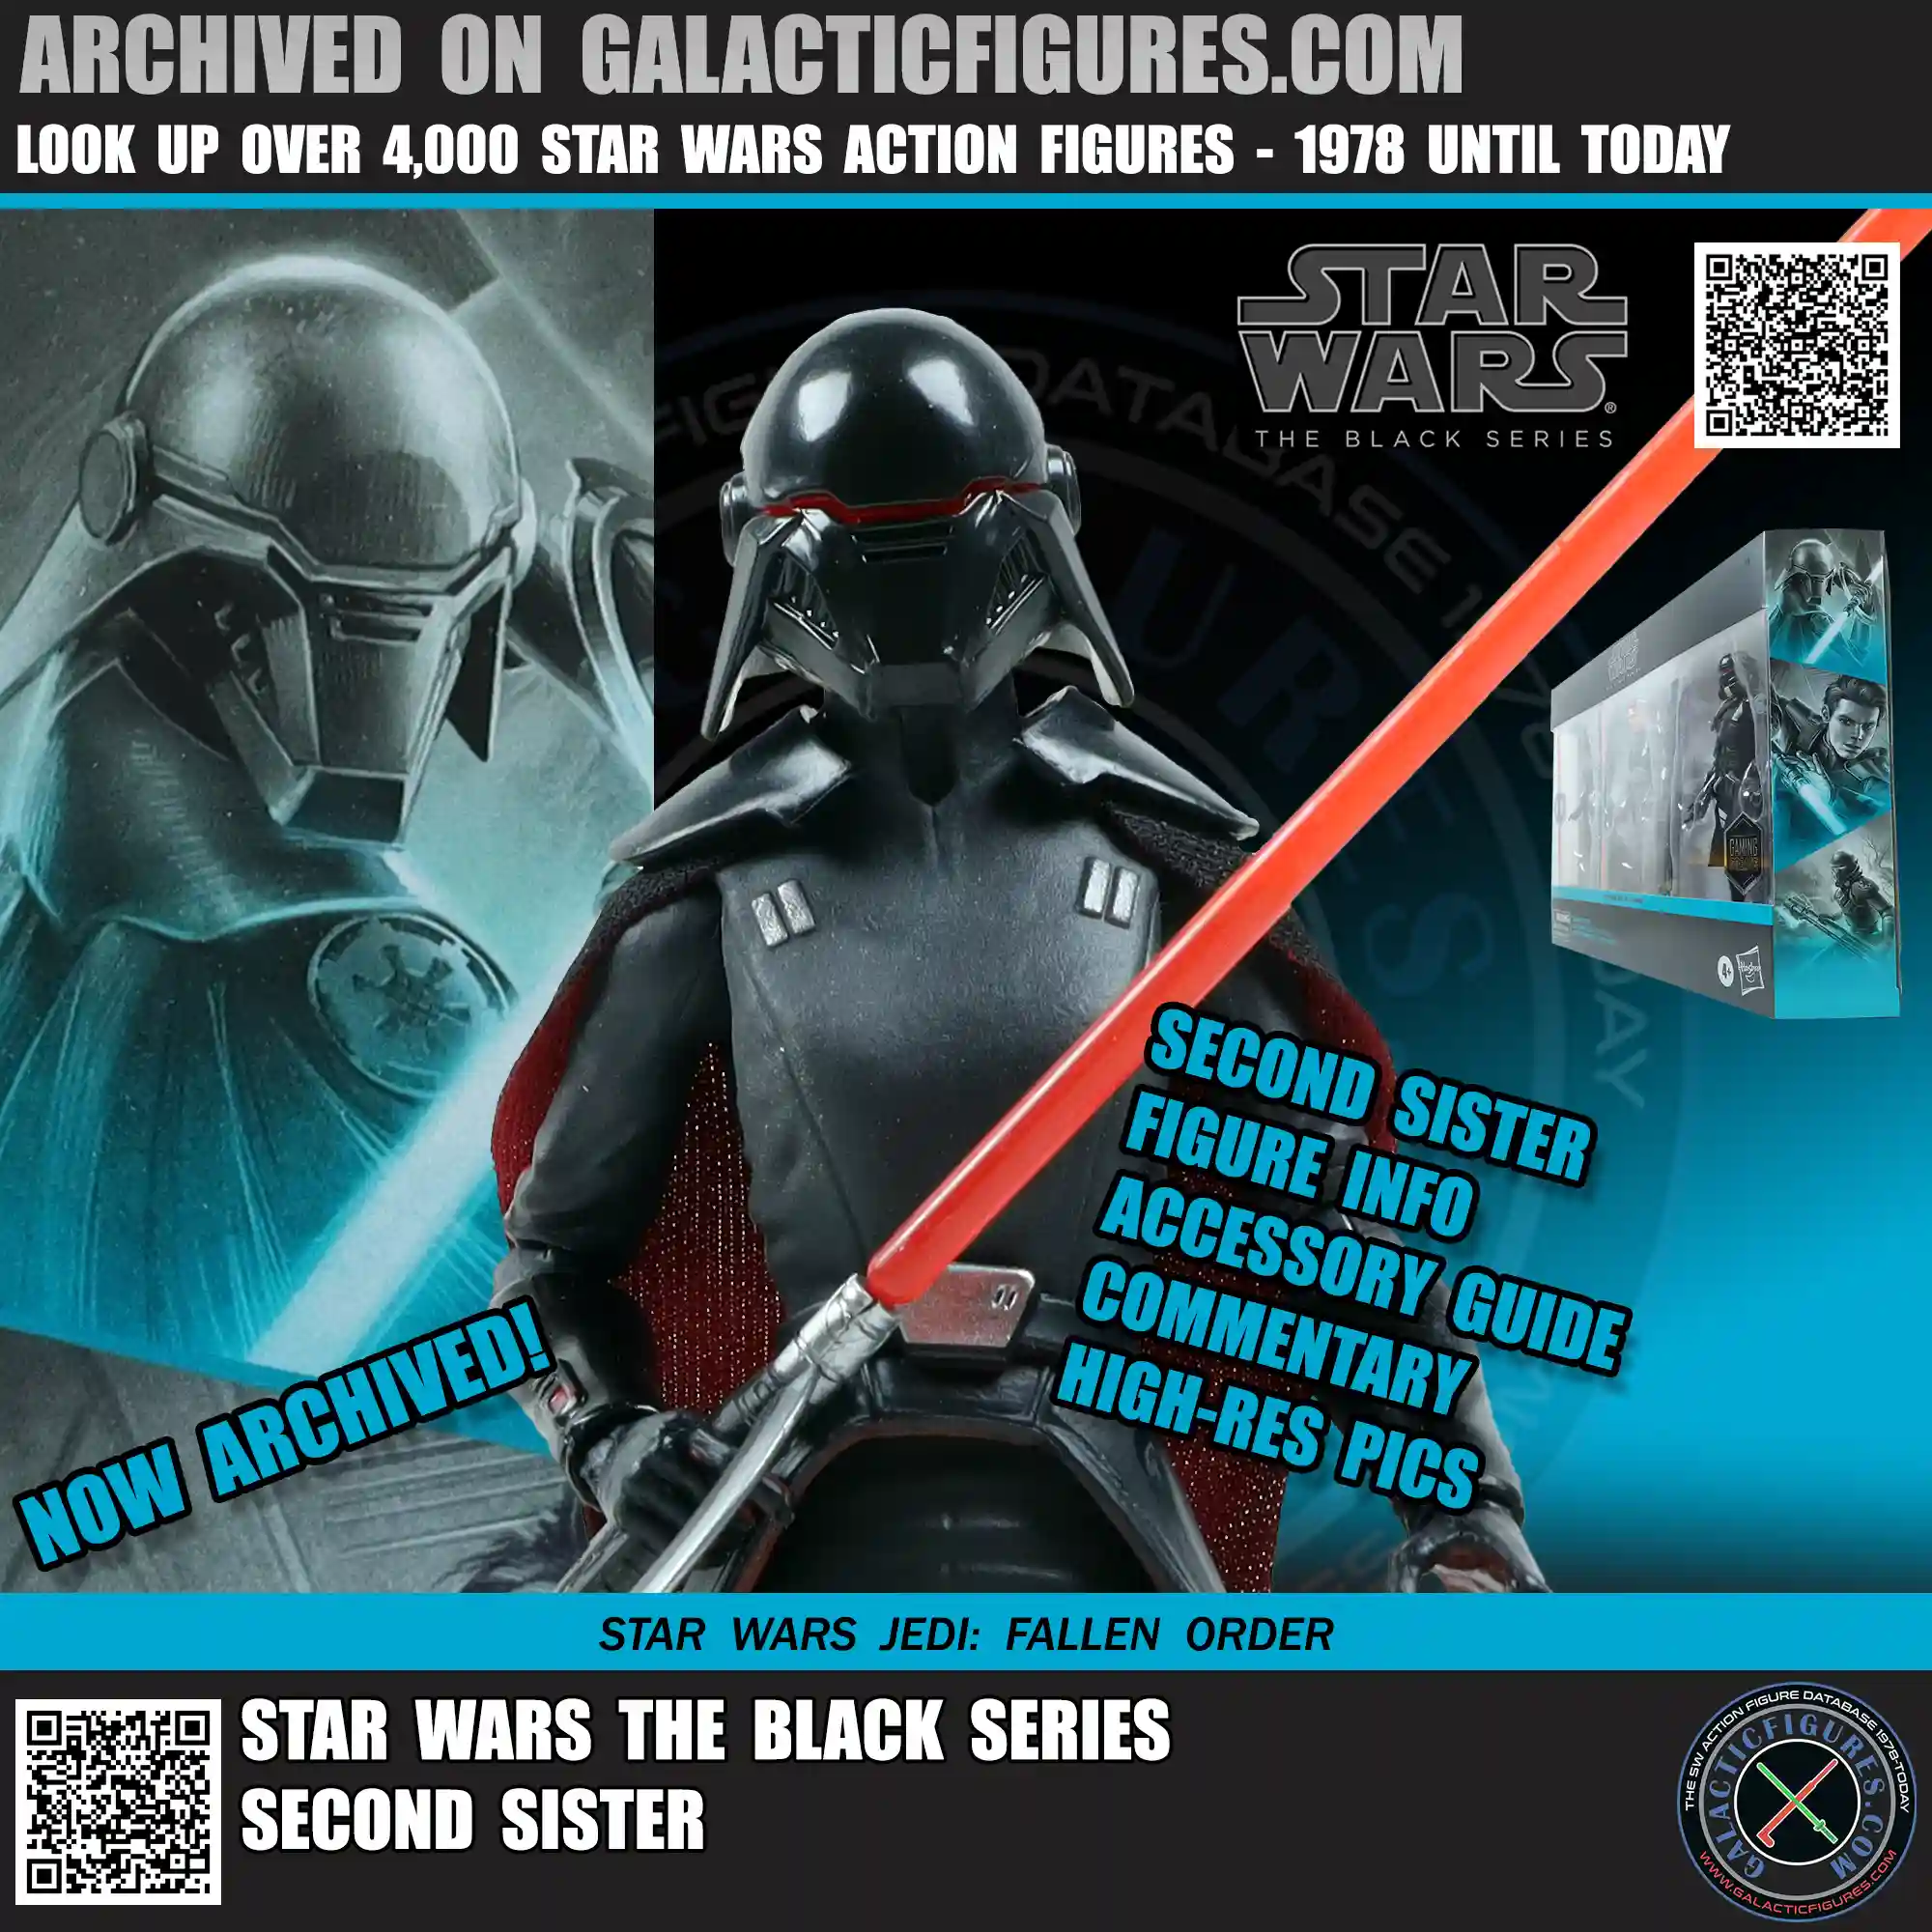 Black Series Second Sister Added